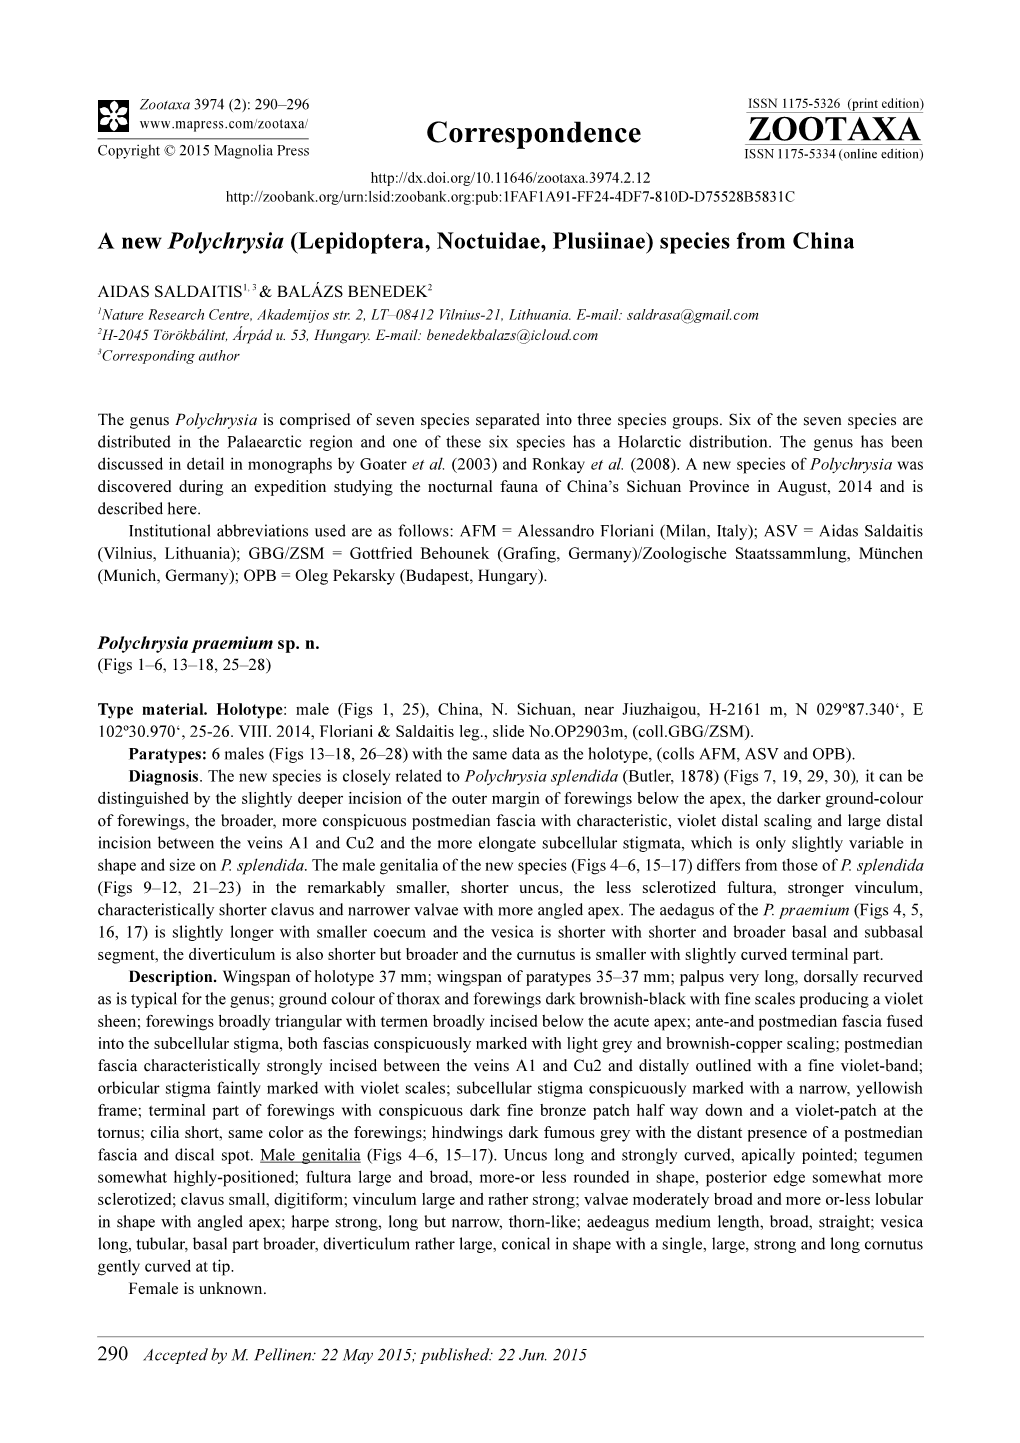 A New Polychrysia (Lepidoptera, Noctuidae, Plusiinae) Species from China